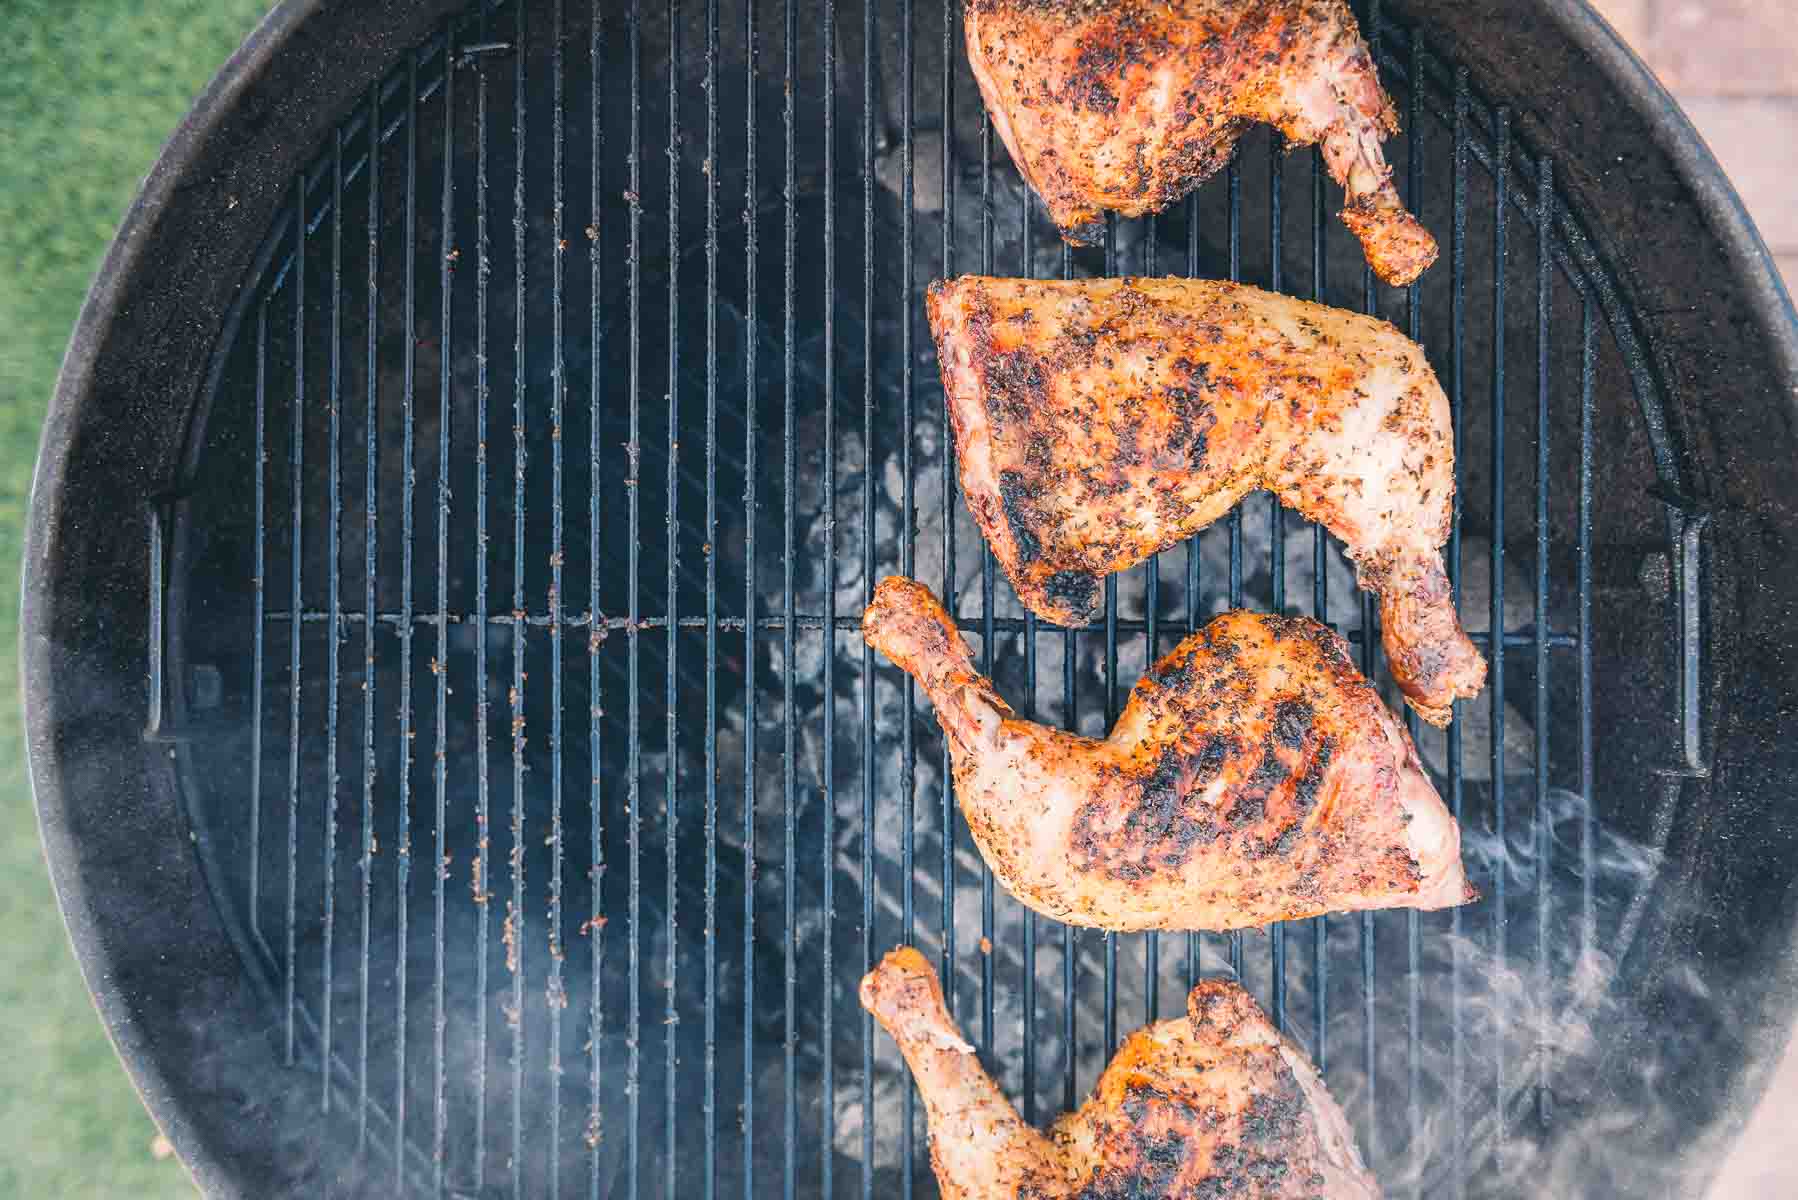 Chicken quarters on the grill after being moved to the hot side with wisps of smoke coming up.